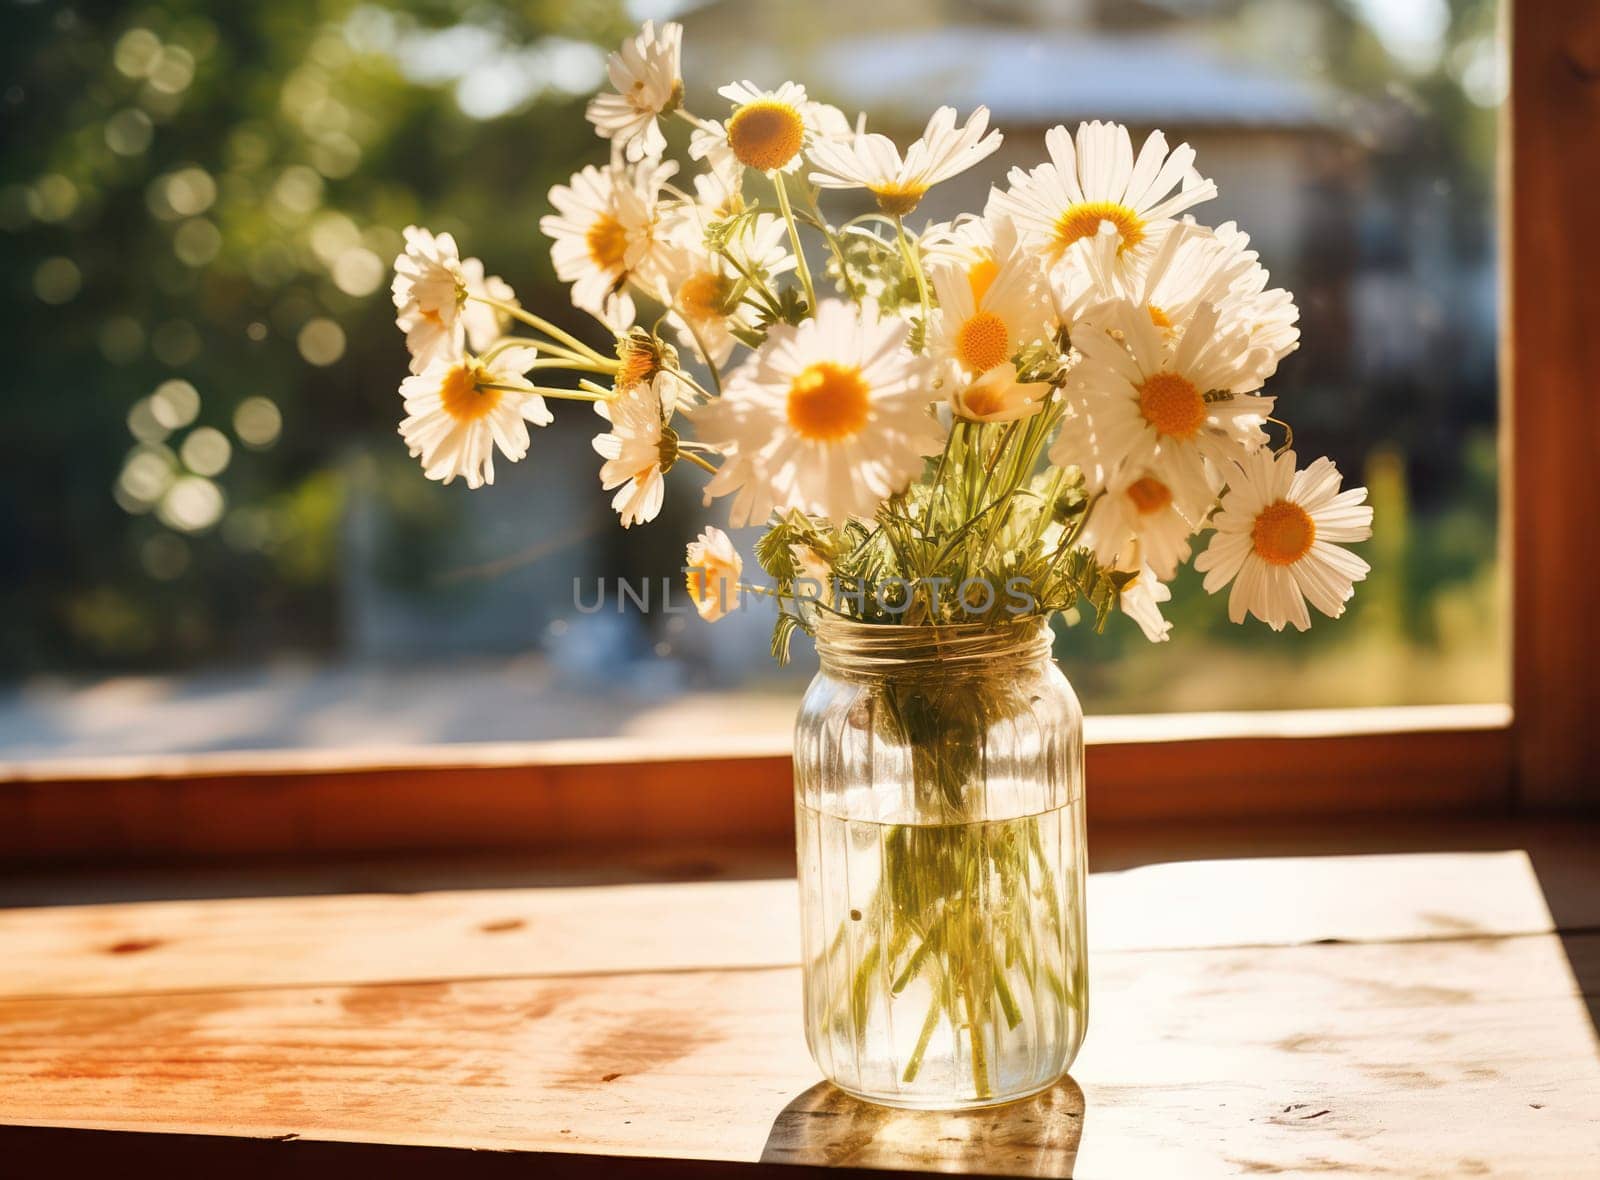 Blooming Beauty: A Colorful Bouquet of Yellow and White Flowers in a Rustic Wooden Vase, Fashioned with Vintage Charm and Placed on a Fresh Green Table. by Vichizh